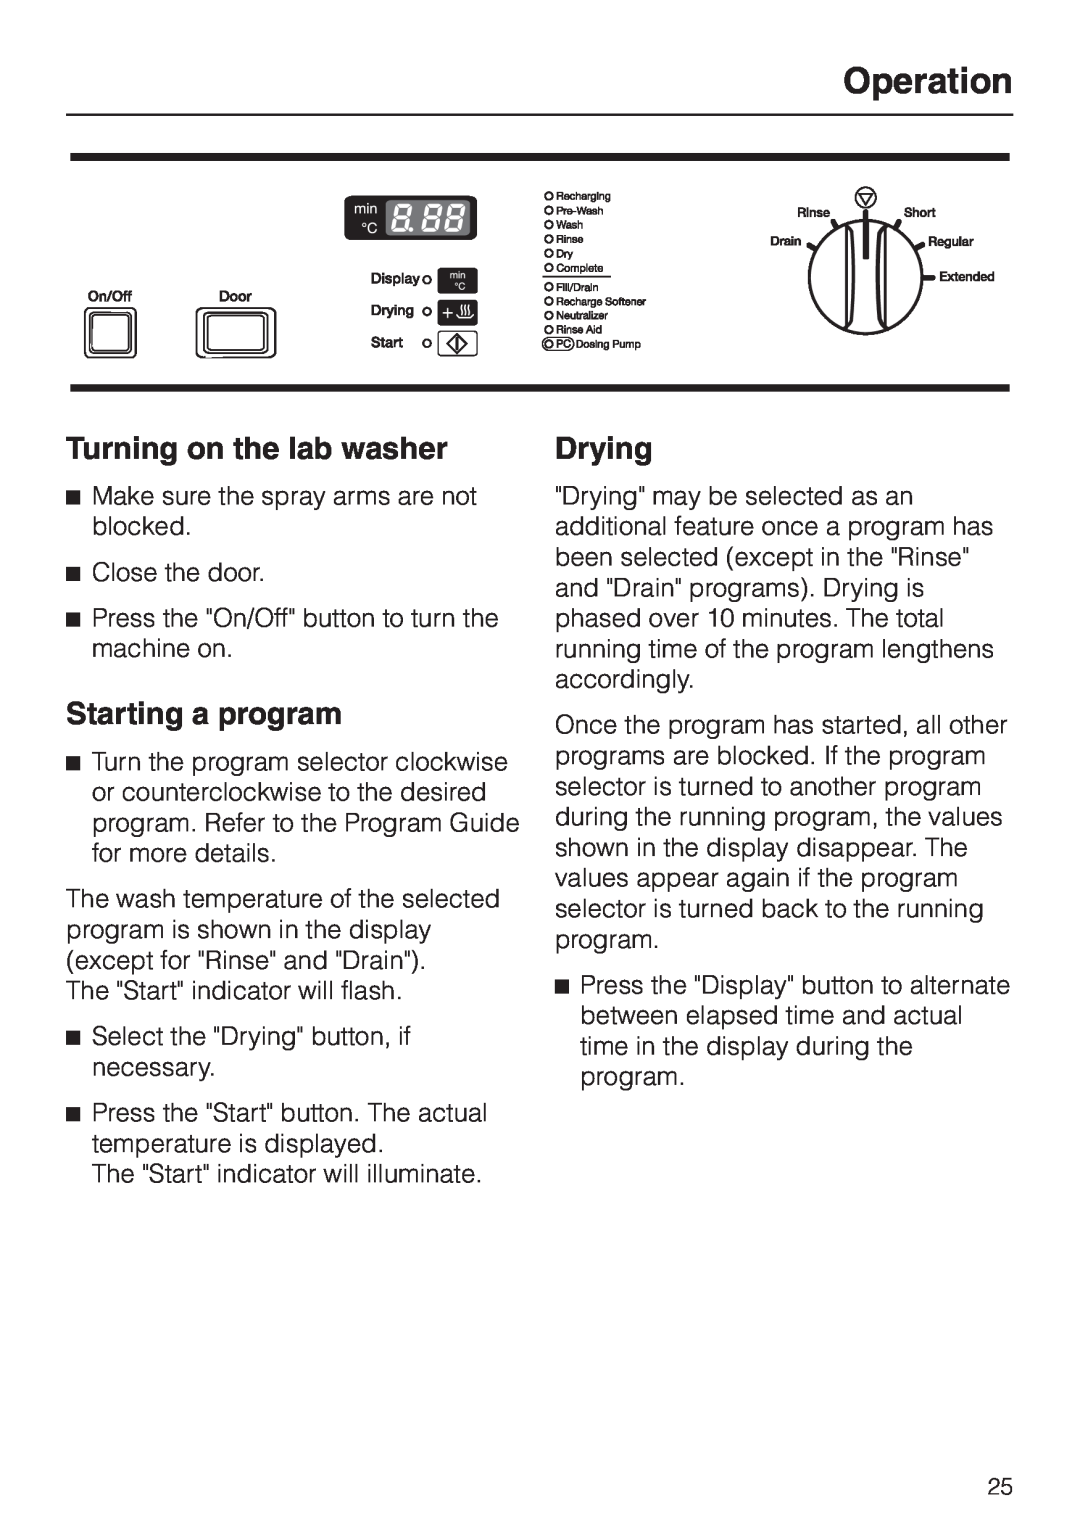 Miele G 7804 operating instructions Operation, Turning on the lab washer, Starting a program, Drying 